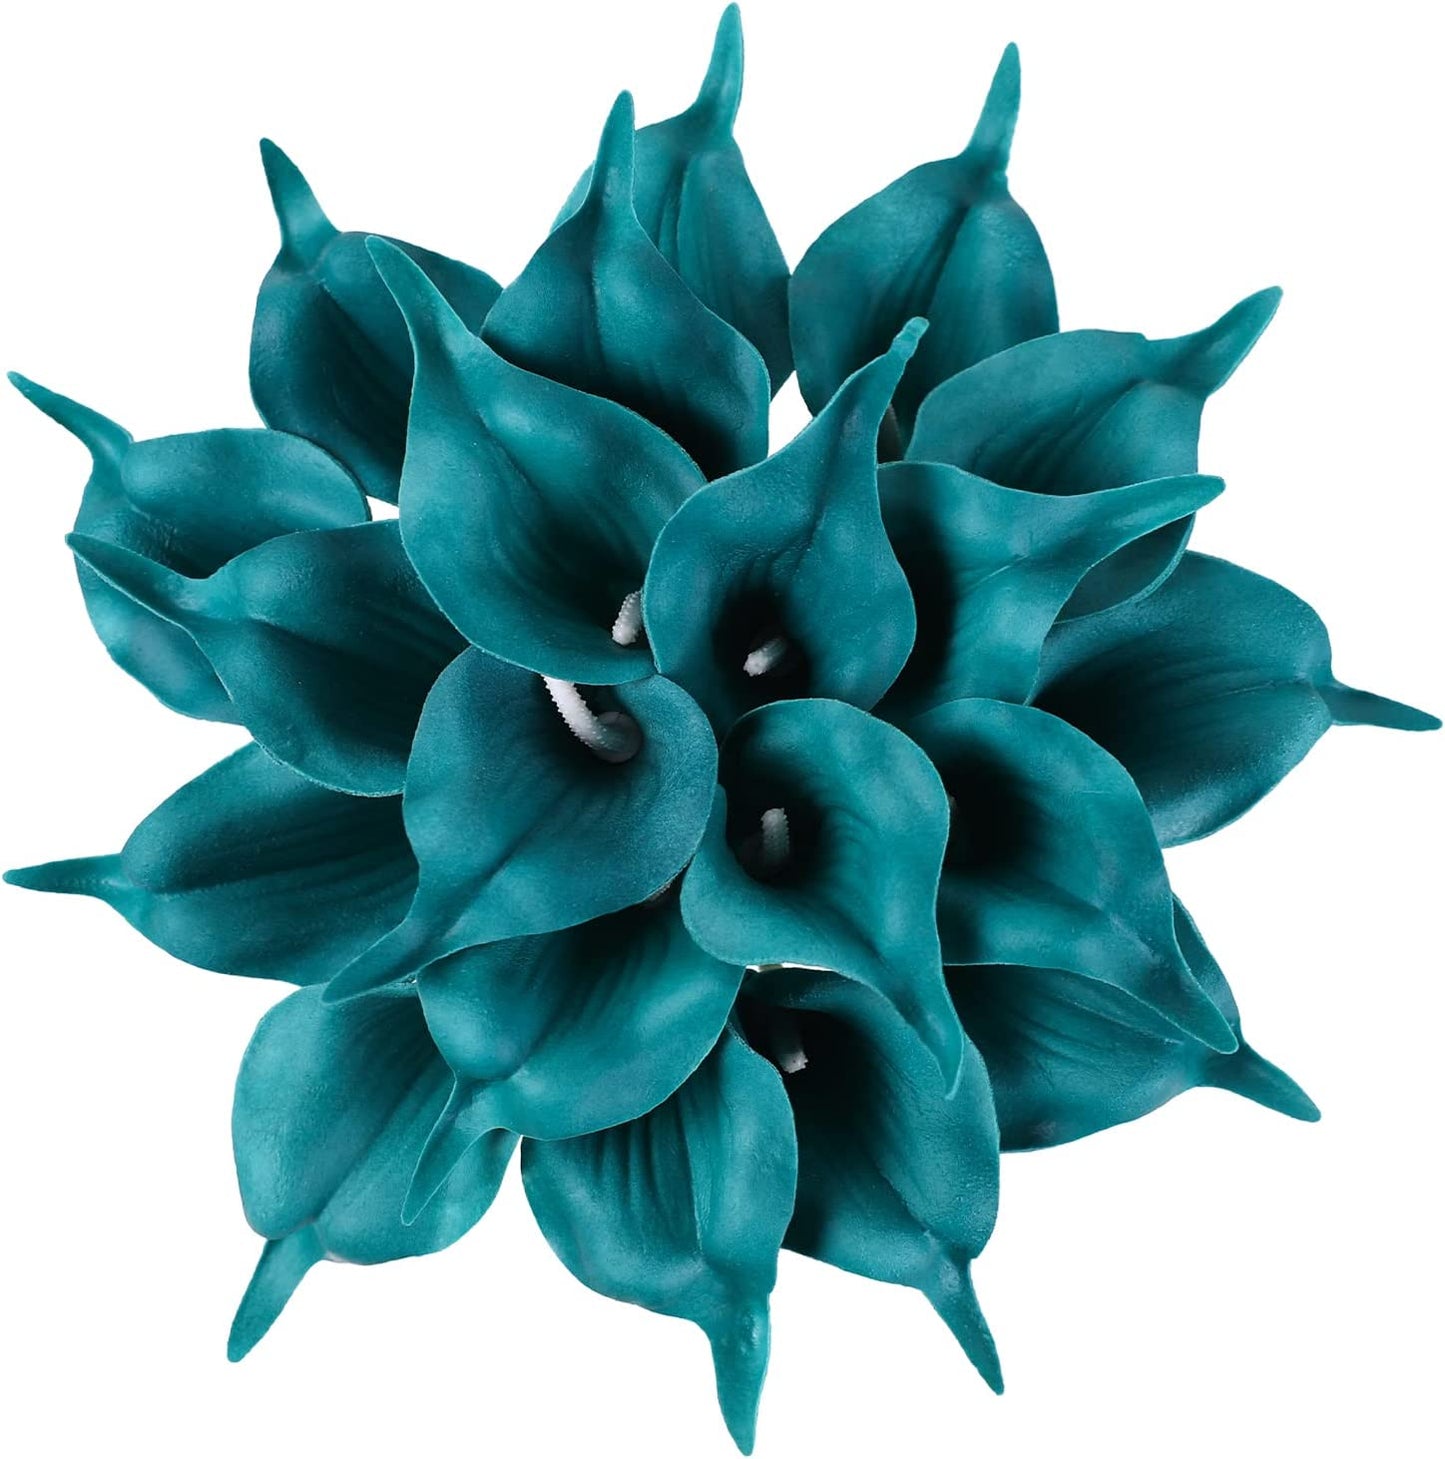 20Pcs Artificial Calla Lily Fake Teal Flowers Wedding Bouquet Real Touch Flower for Bride Wedding Home (Peacock Blue)